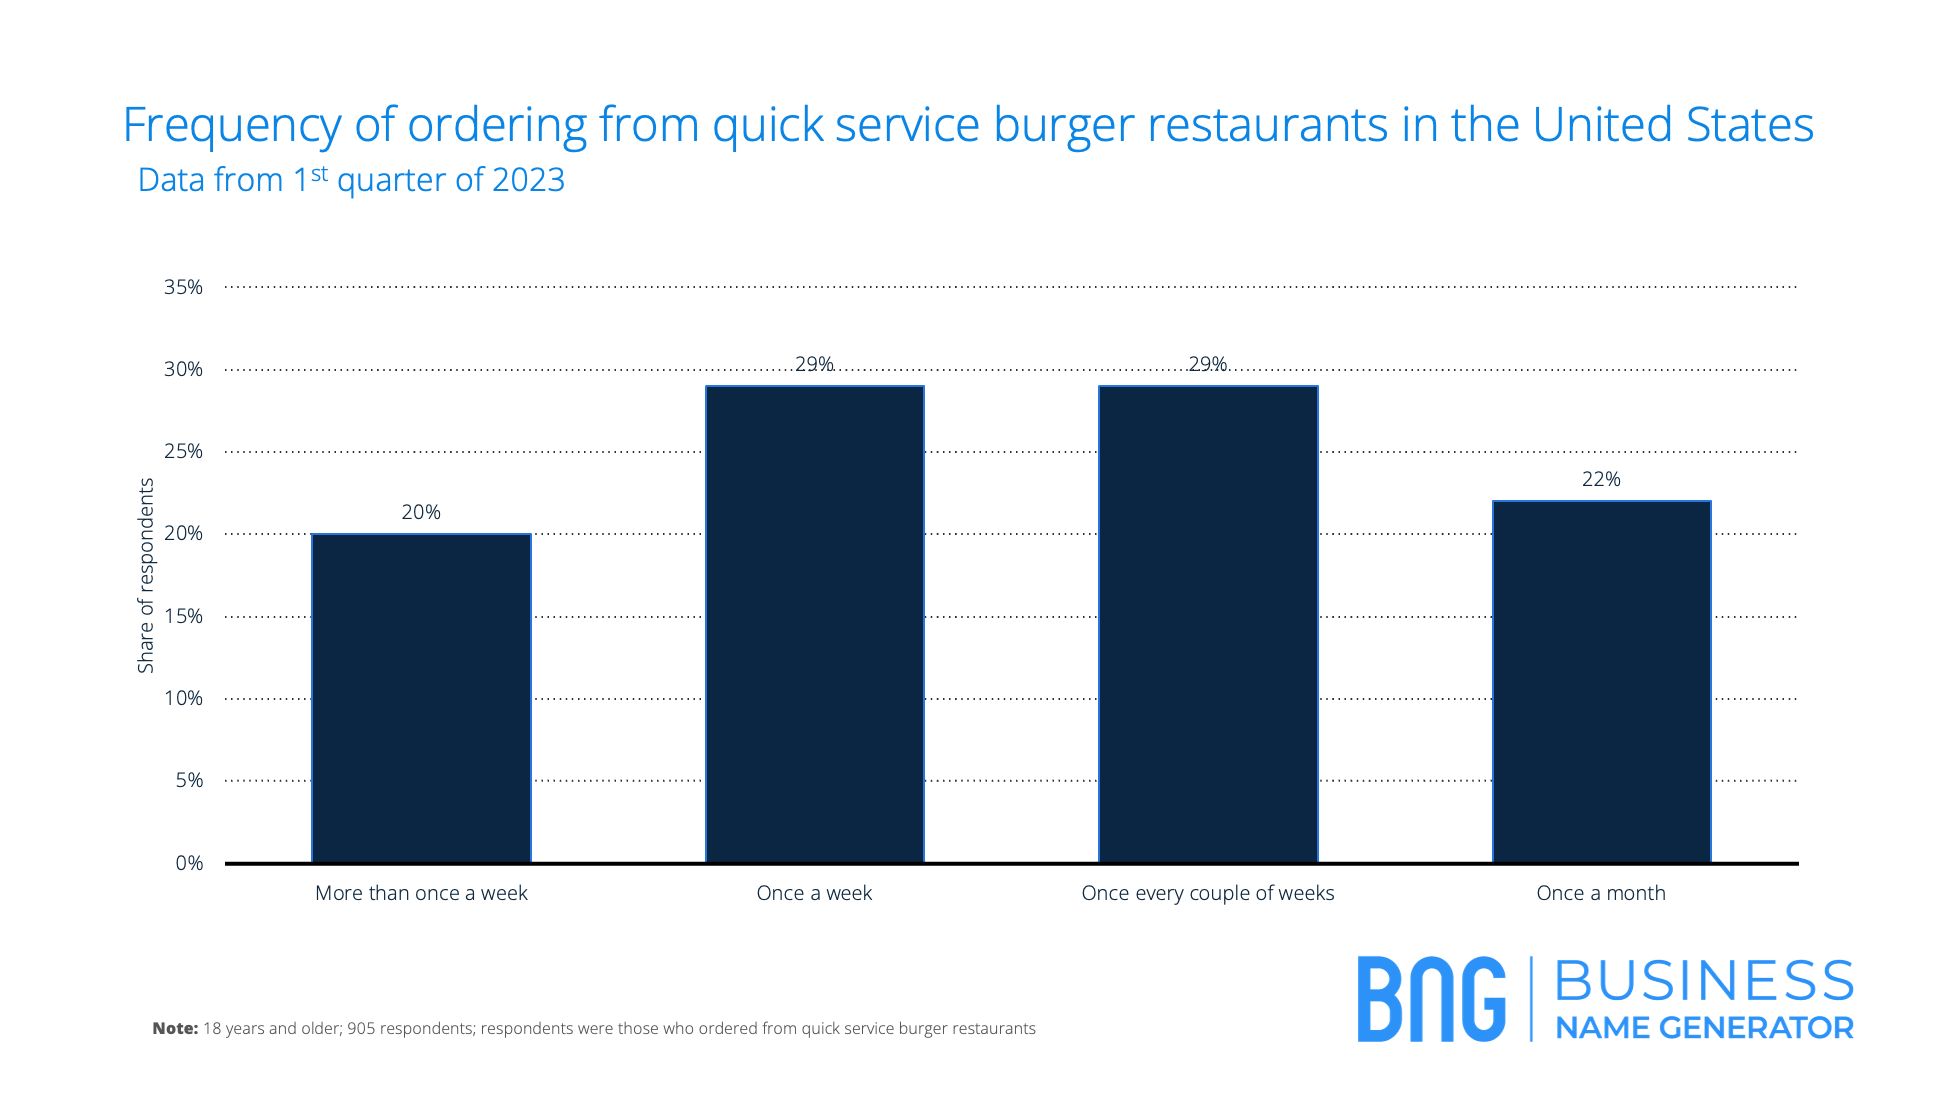 Frequency of Orders from Burger Restaurants